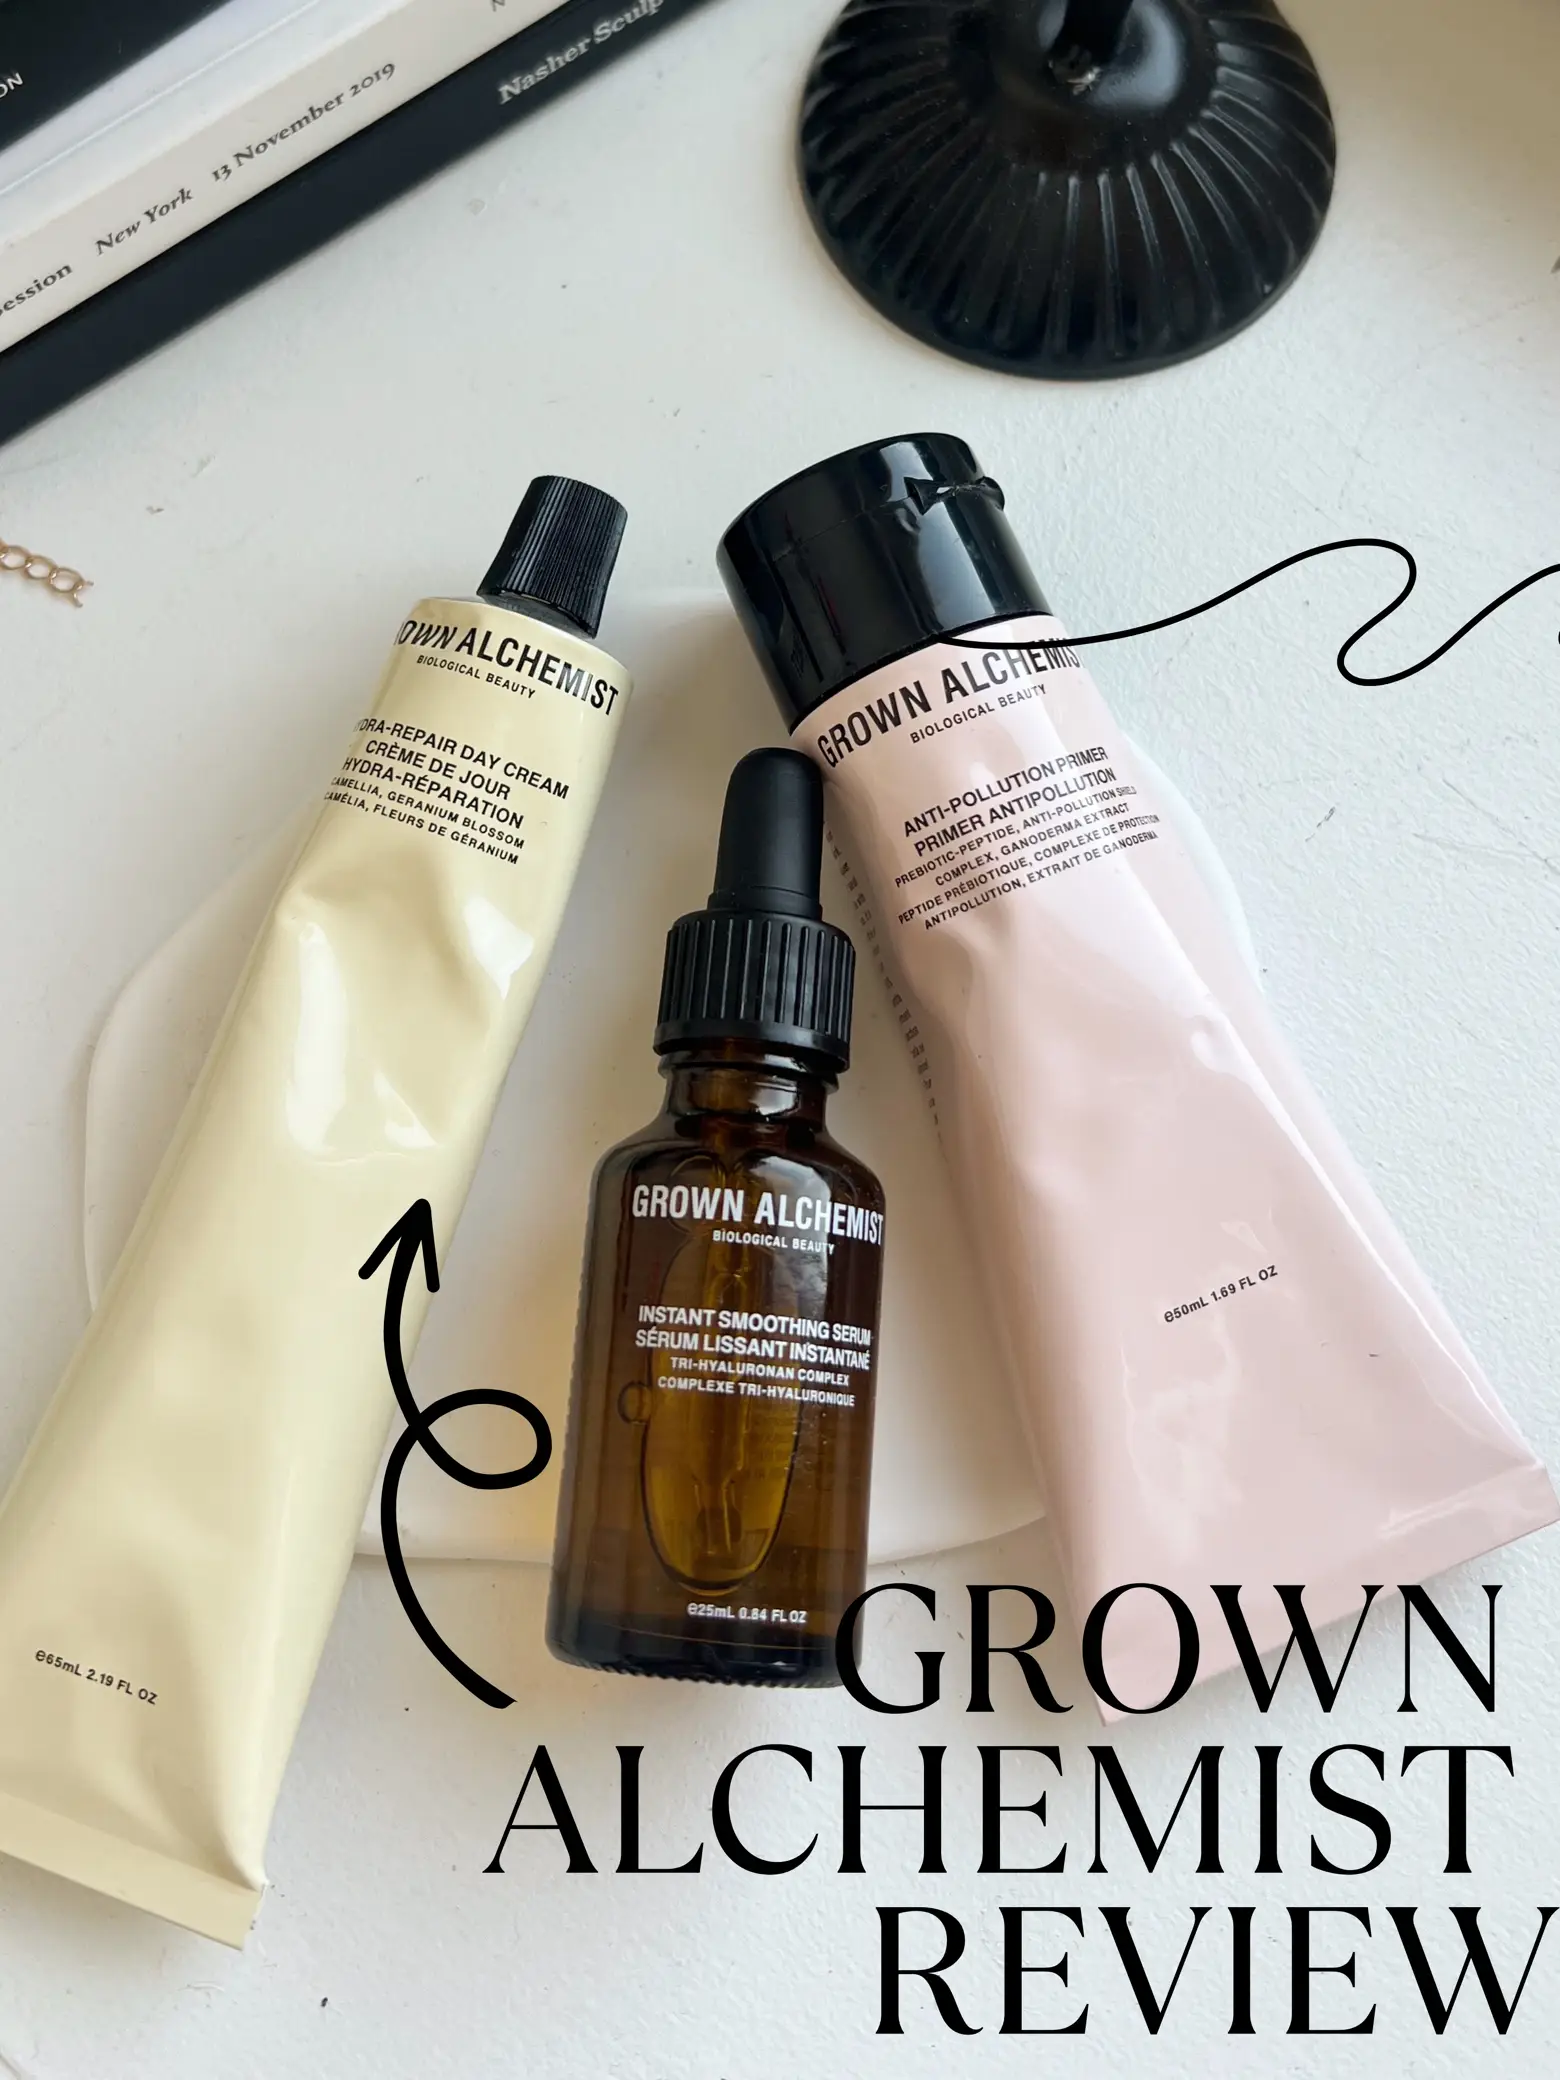 Grown Alchemist Review 🤌💋✨ | Gallery posted by Janet | Lemon8